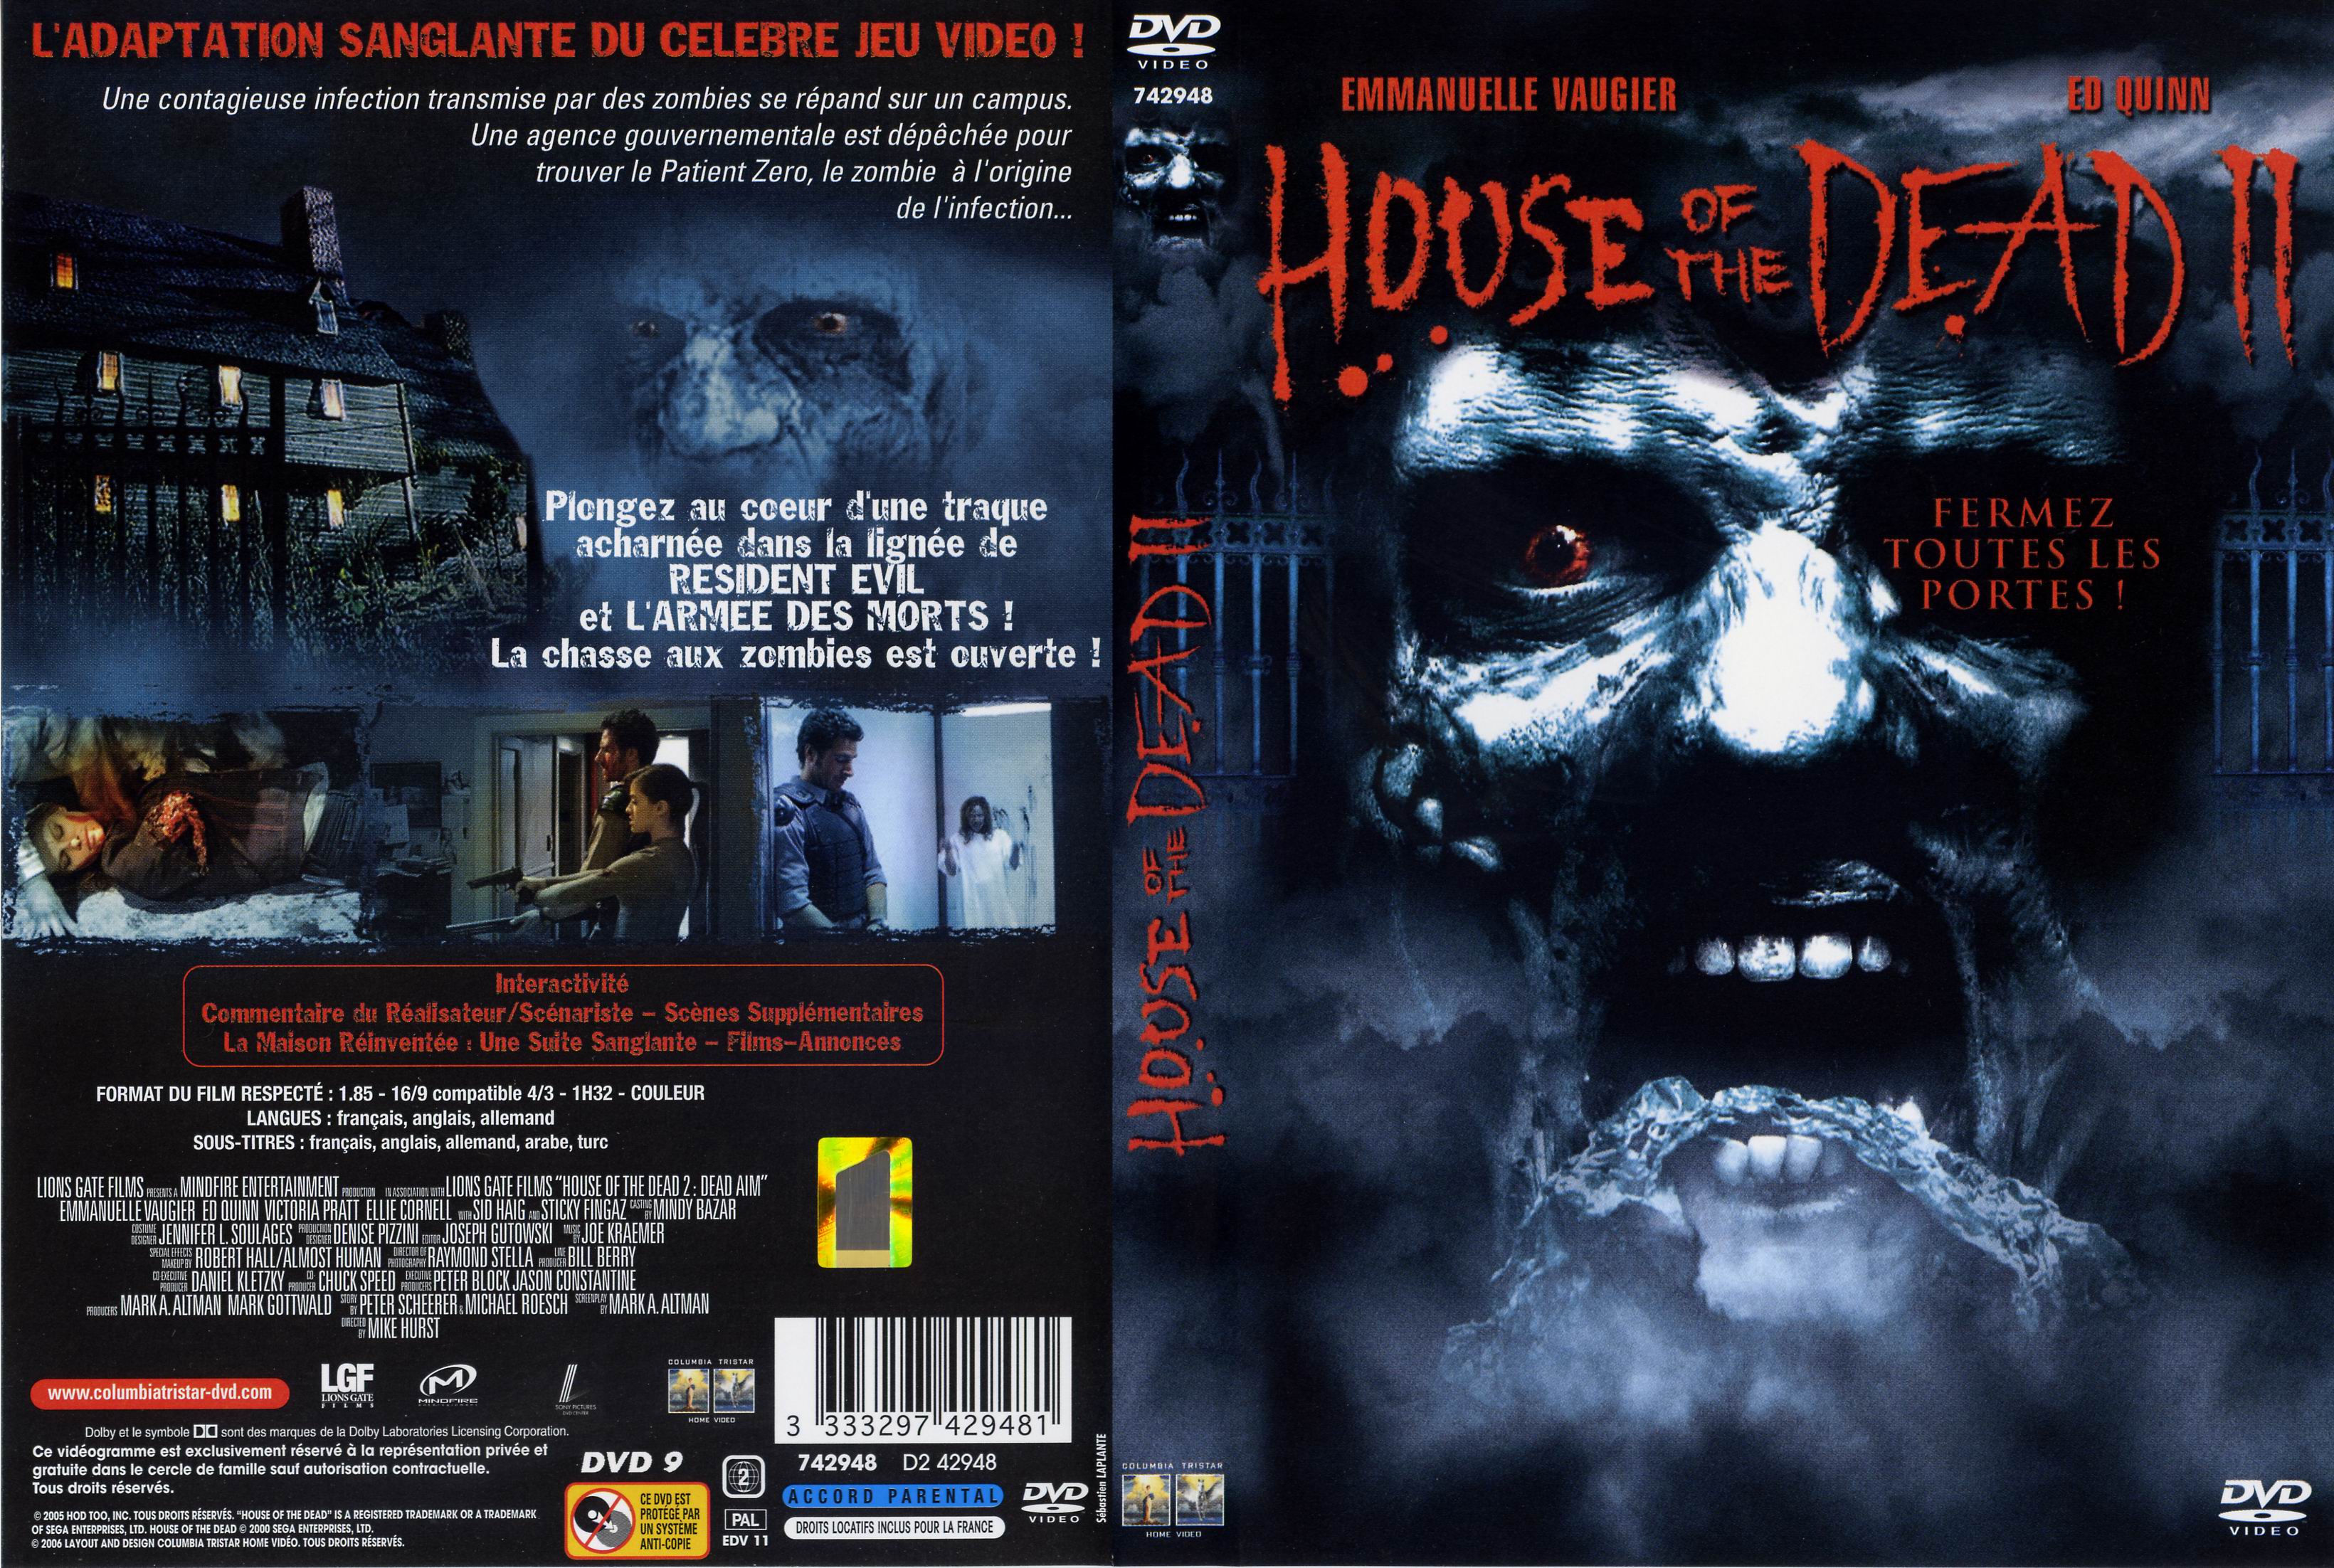 Jaquette DVD House of the Dead 2